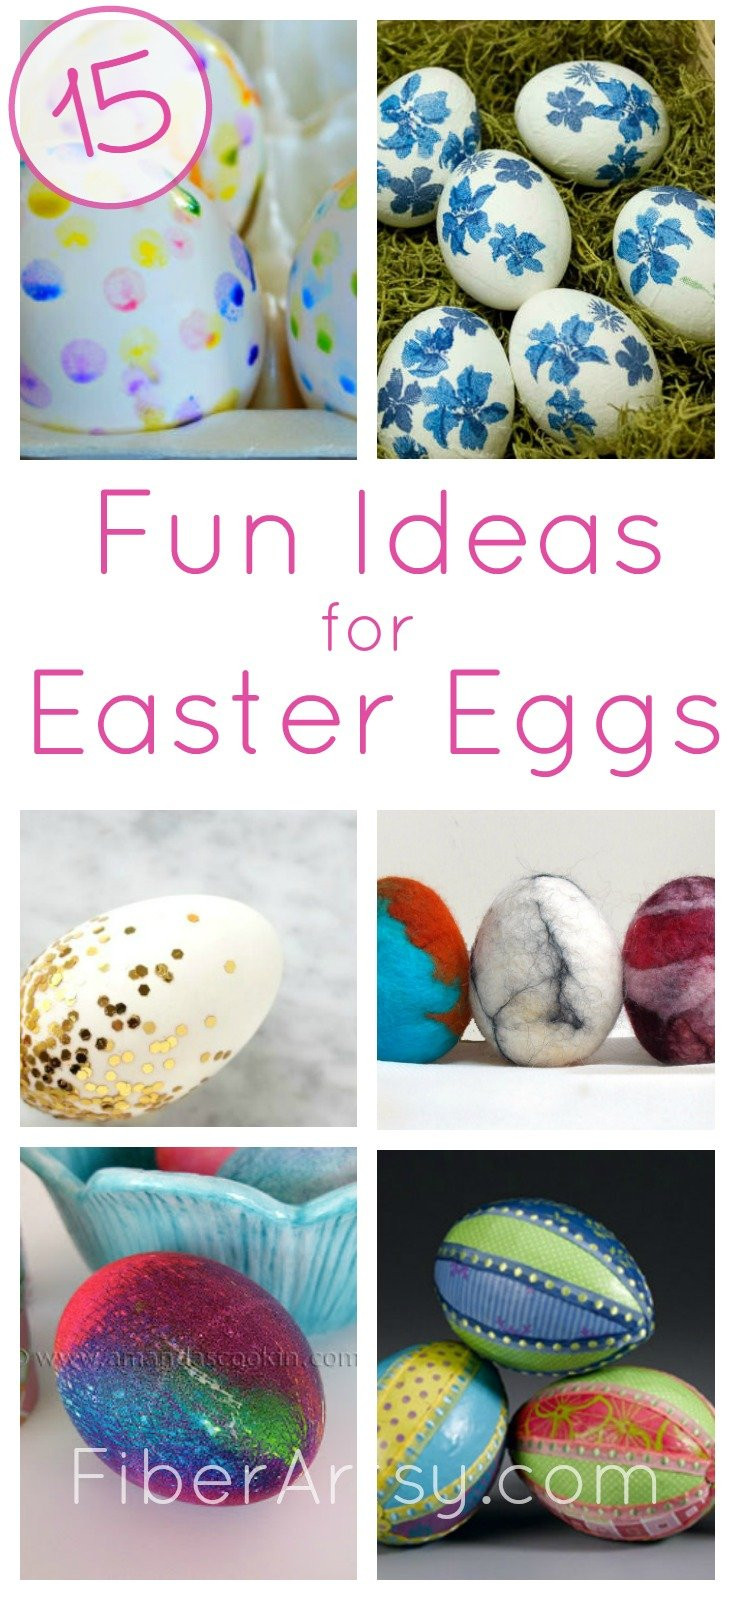 Easter Egg Decoration Ideas
 Easter Egg Decorating Ideas for Adults and Kids